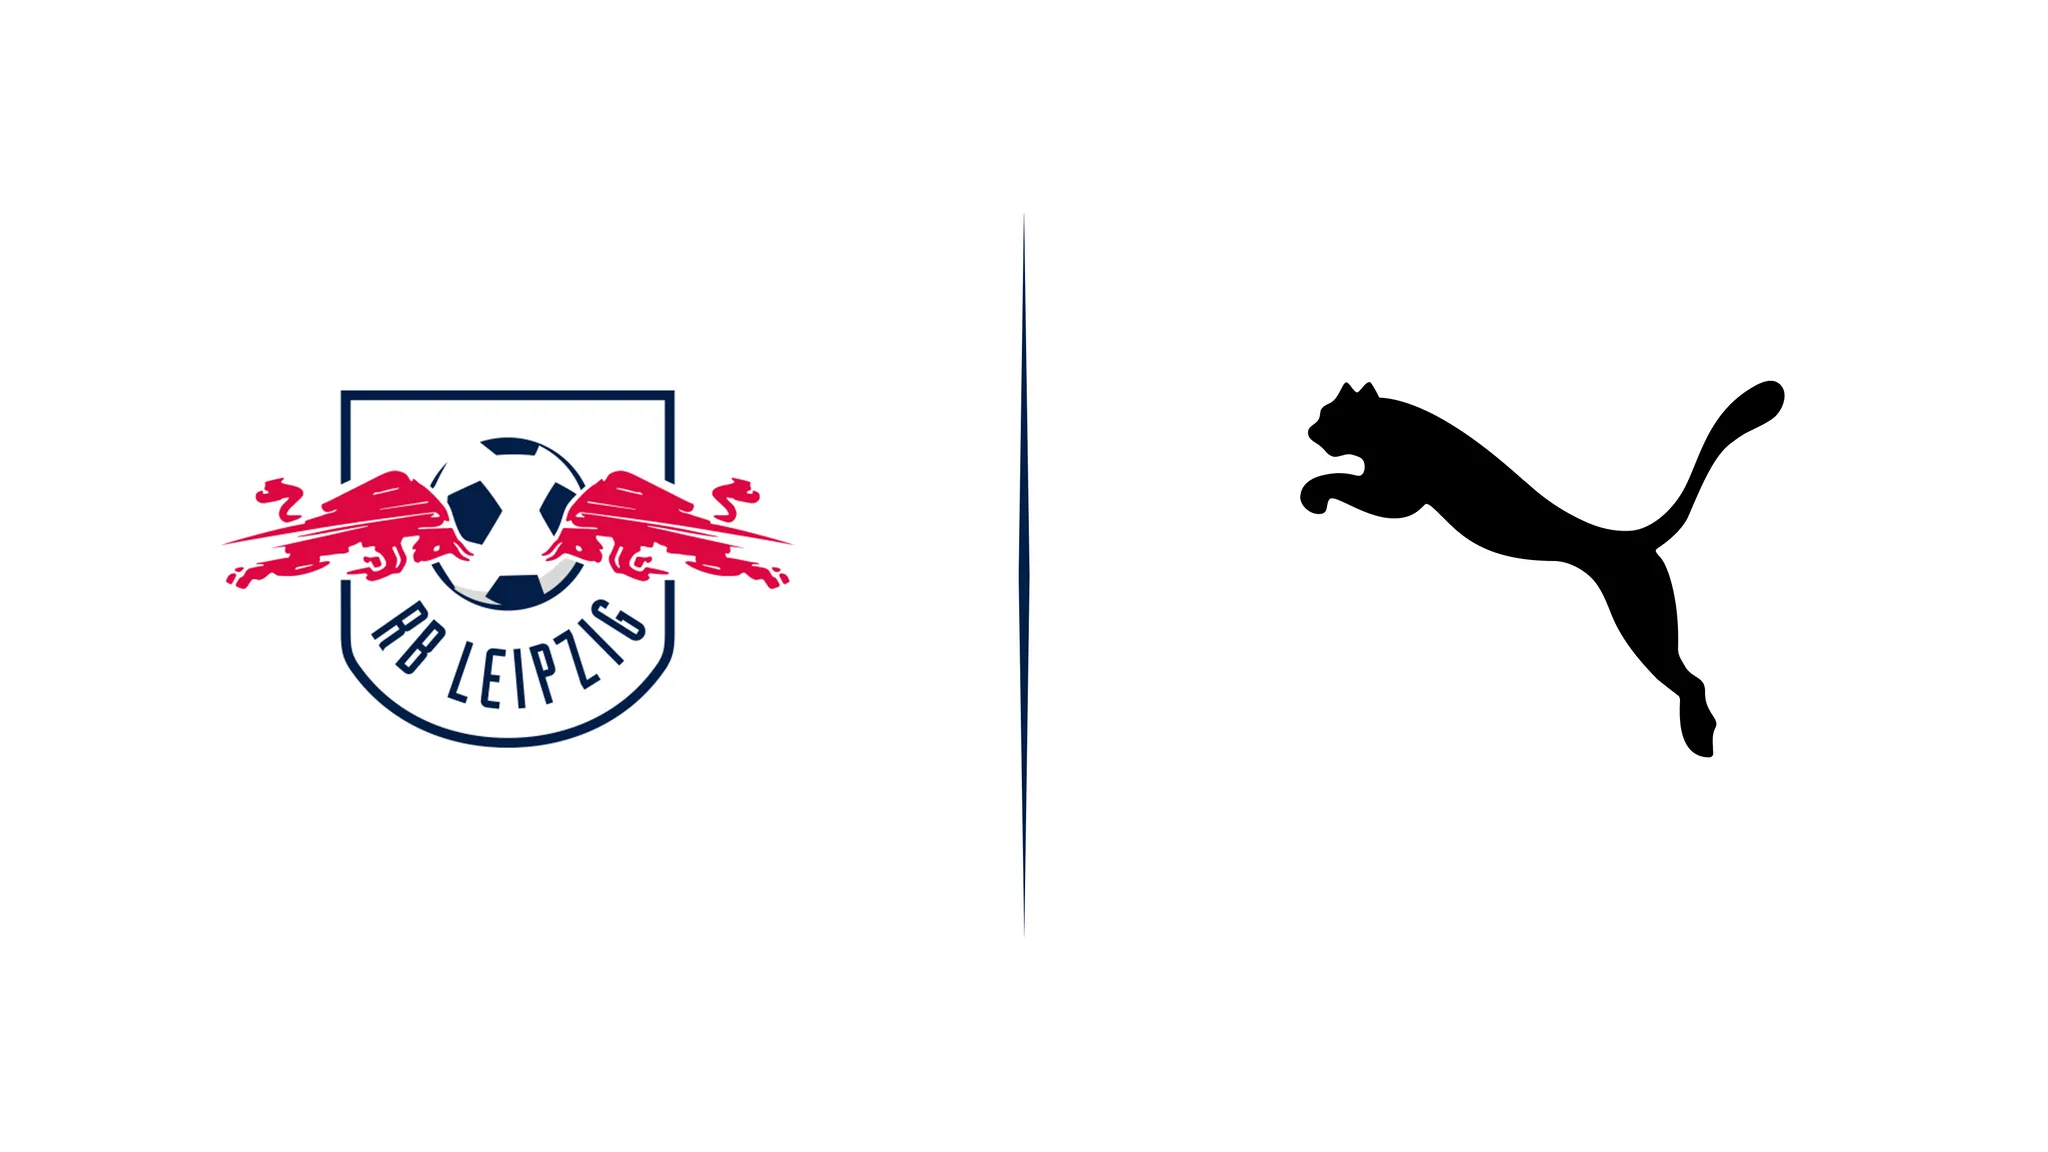 RB Leipzig agree long-term partnership with PUMA as new kit supplier